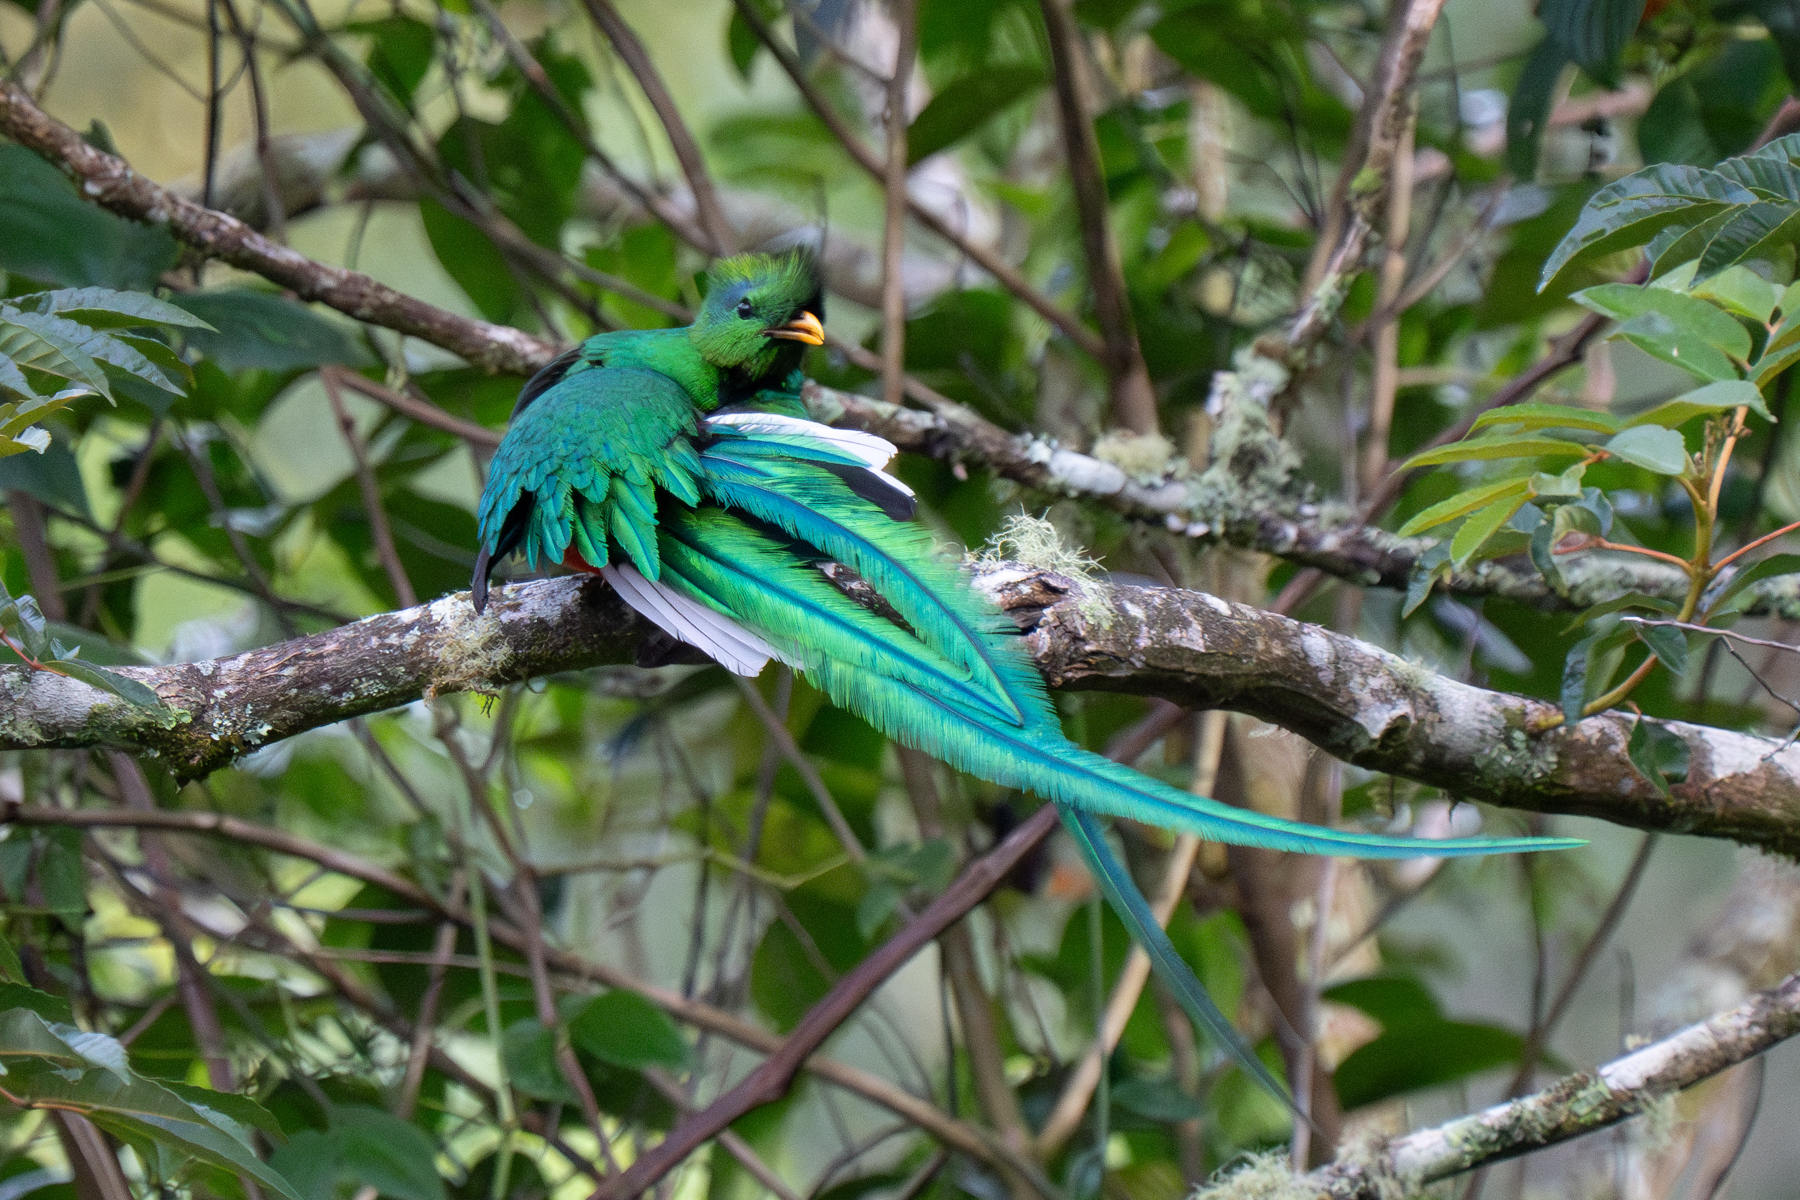 A male Resplendent Quetzal preening his feathers (image by Inger Vandyke)